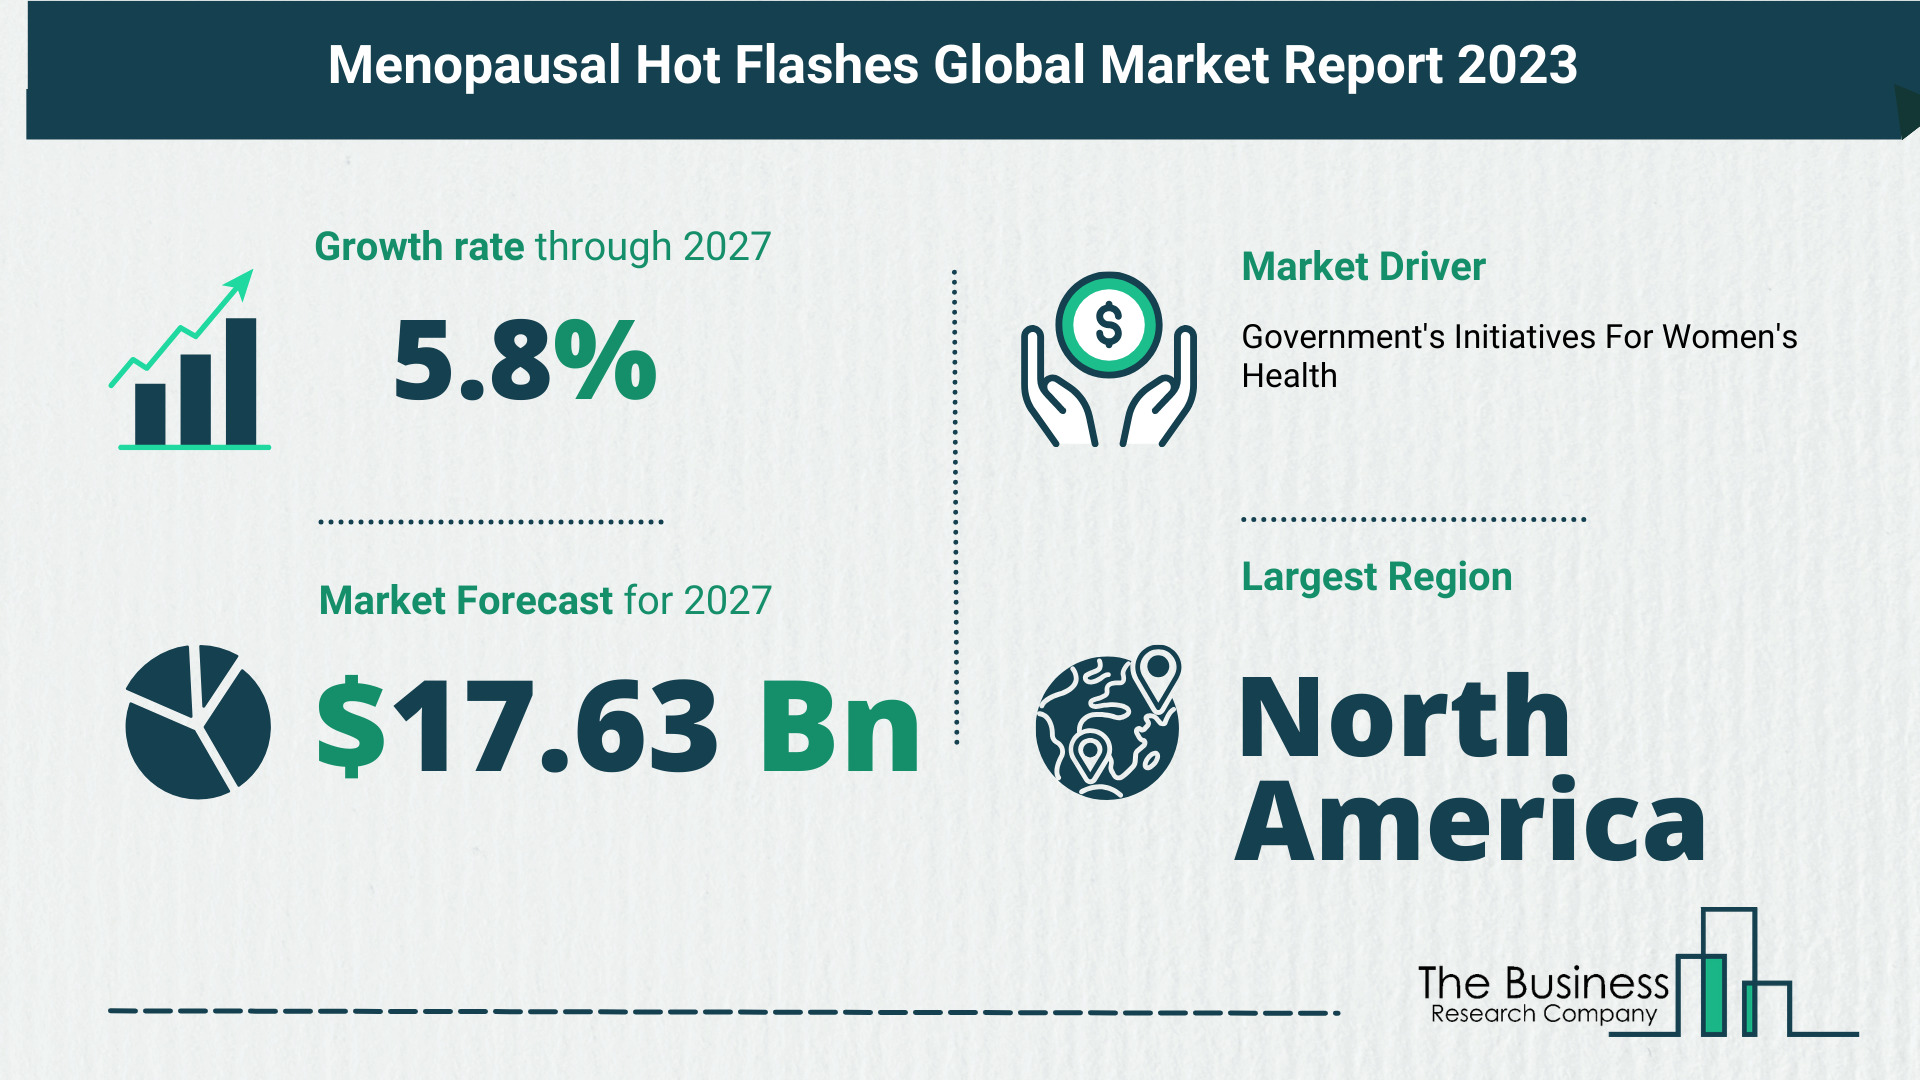 Global Menopausal Hot Flashes Market Analysis 2023: Size, Share, And Key Trends